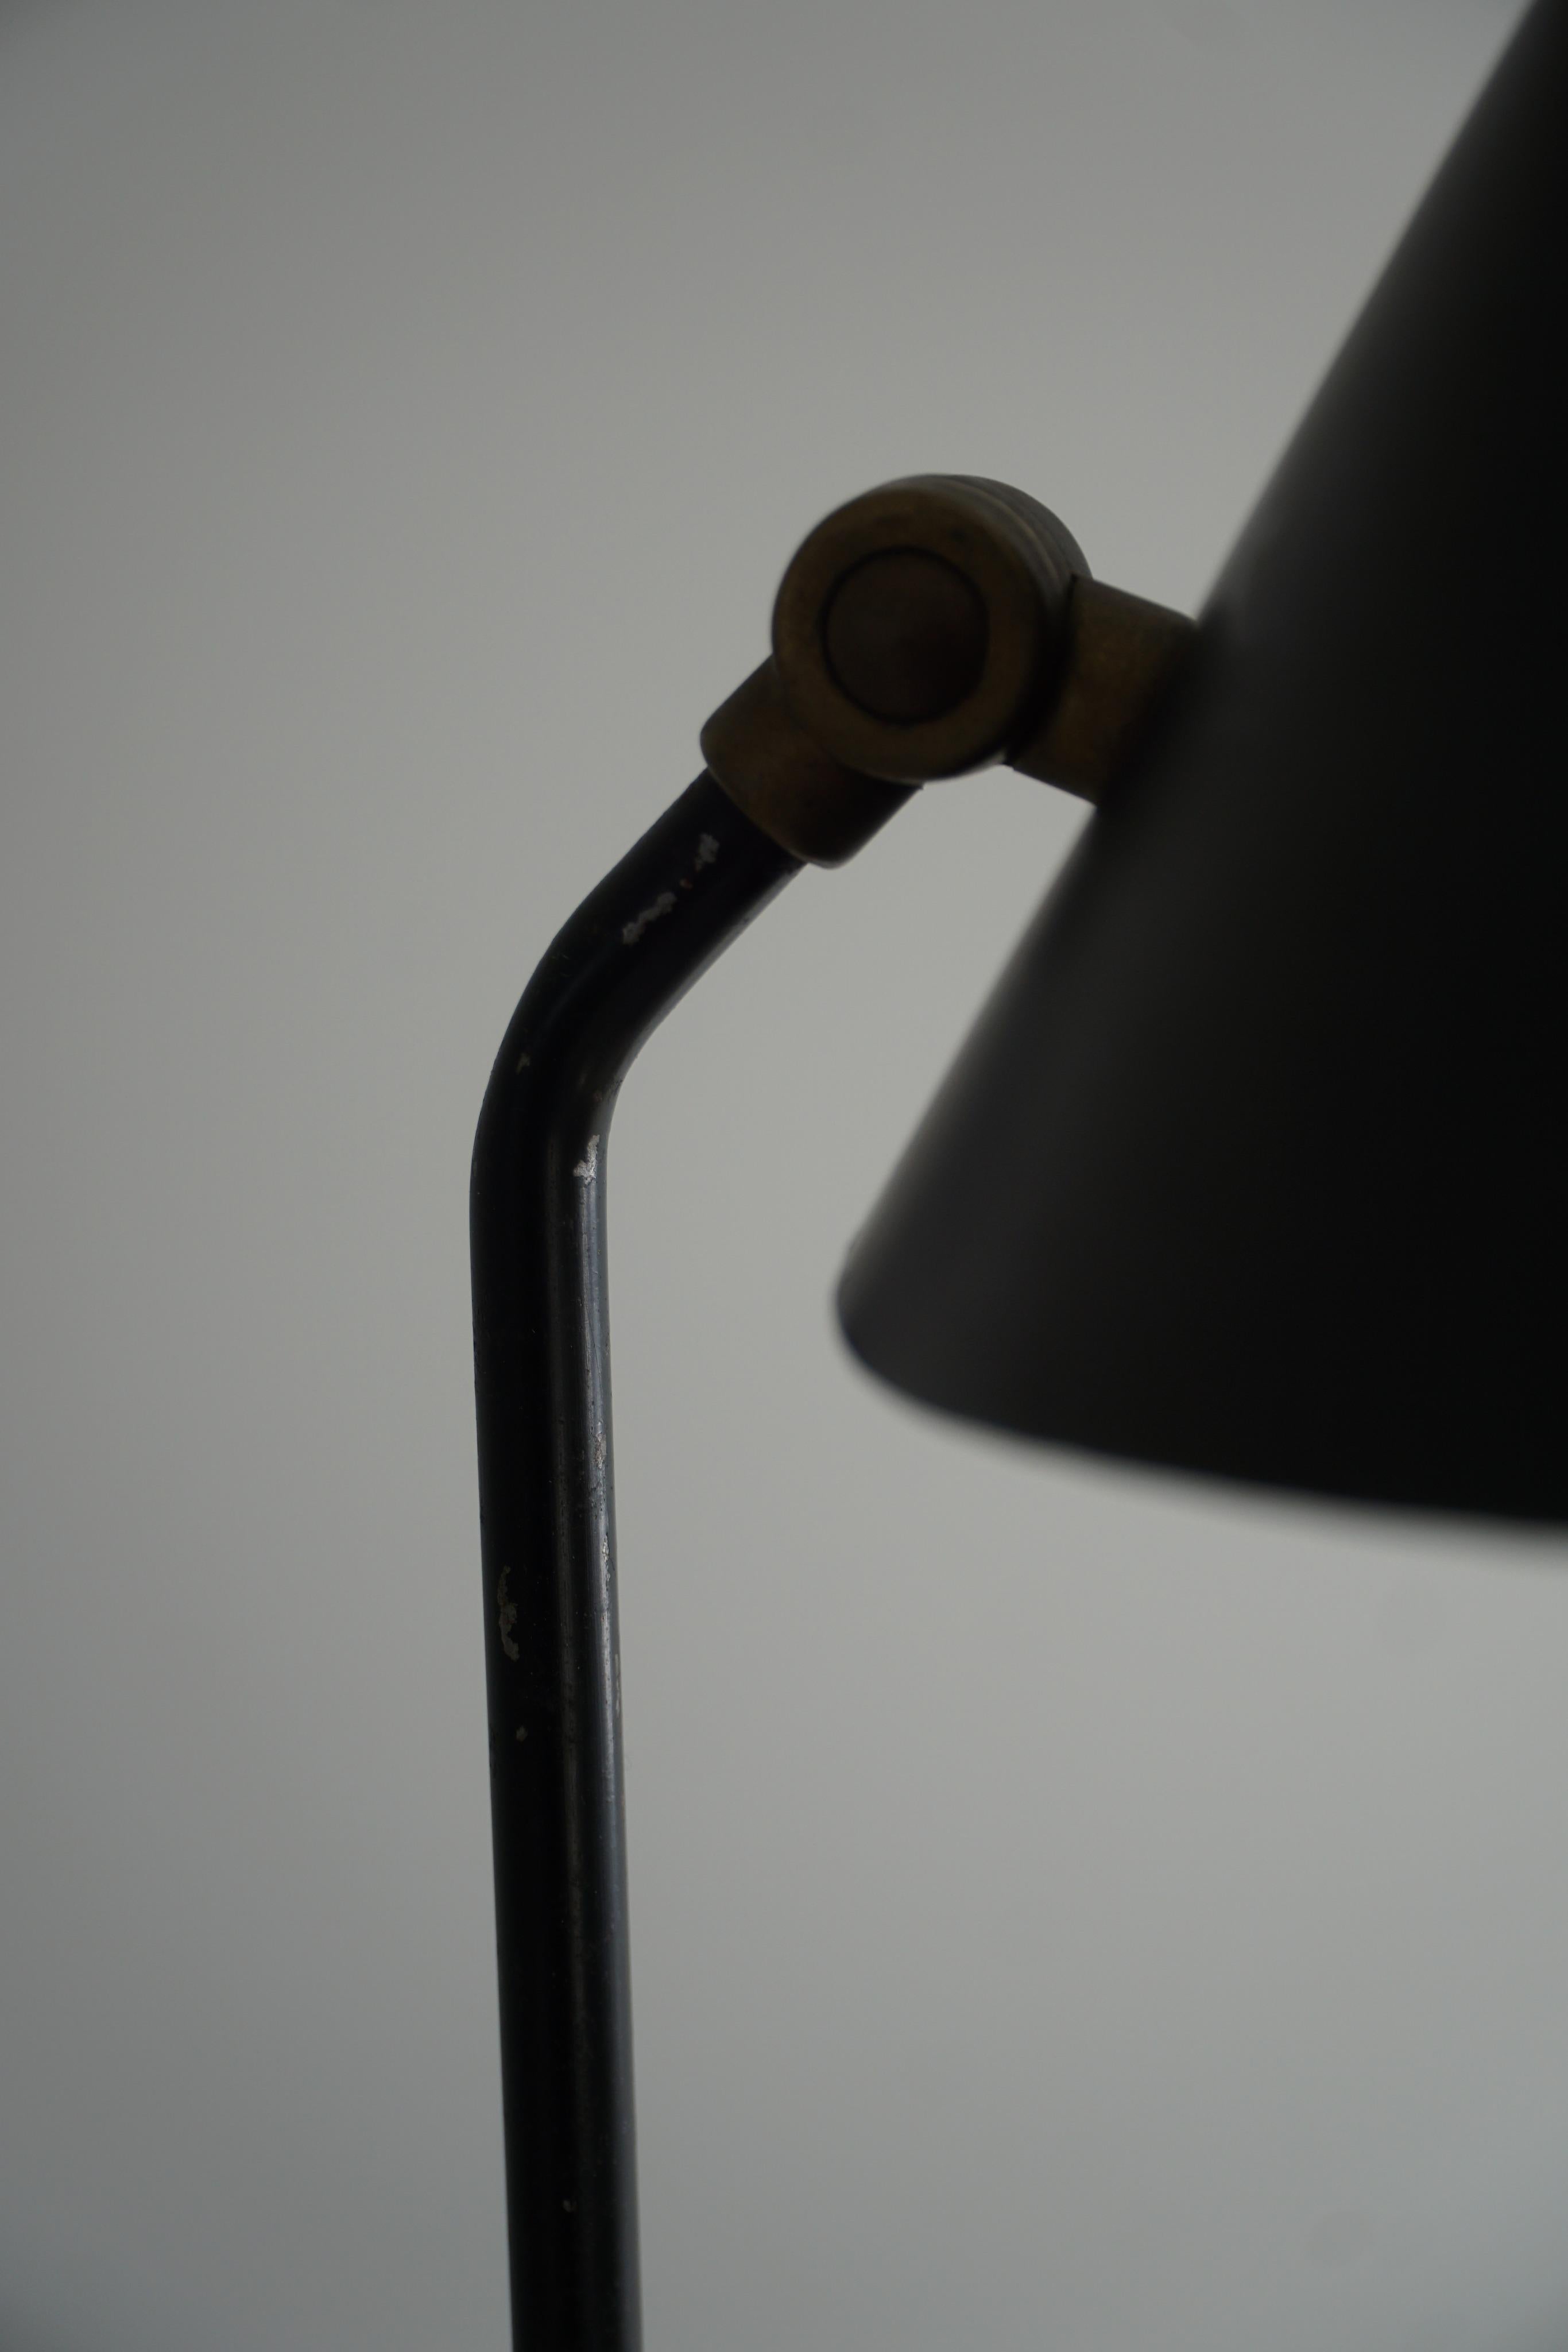 Danish Modern Adjustable Table Lamp in Metal, Made by Louis Poulsen, 1950s For Sale 2